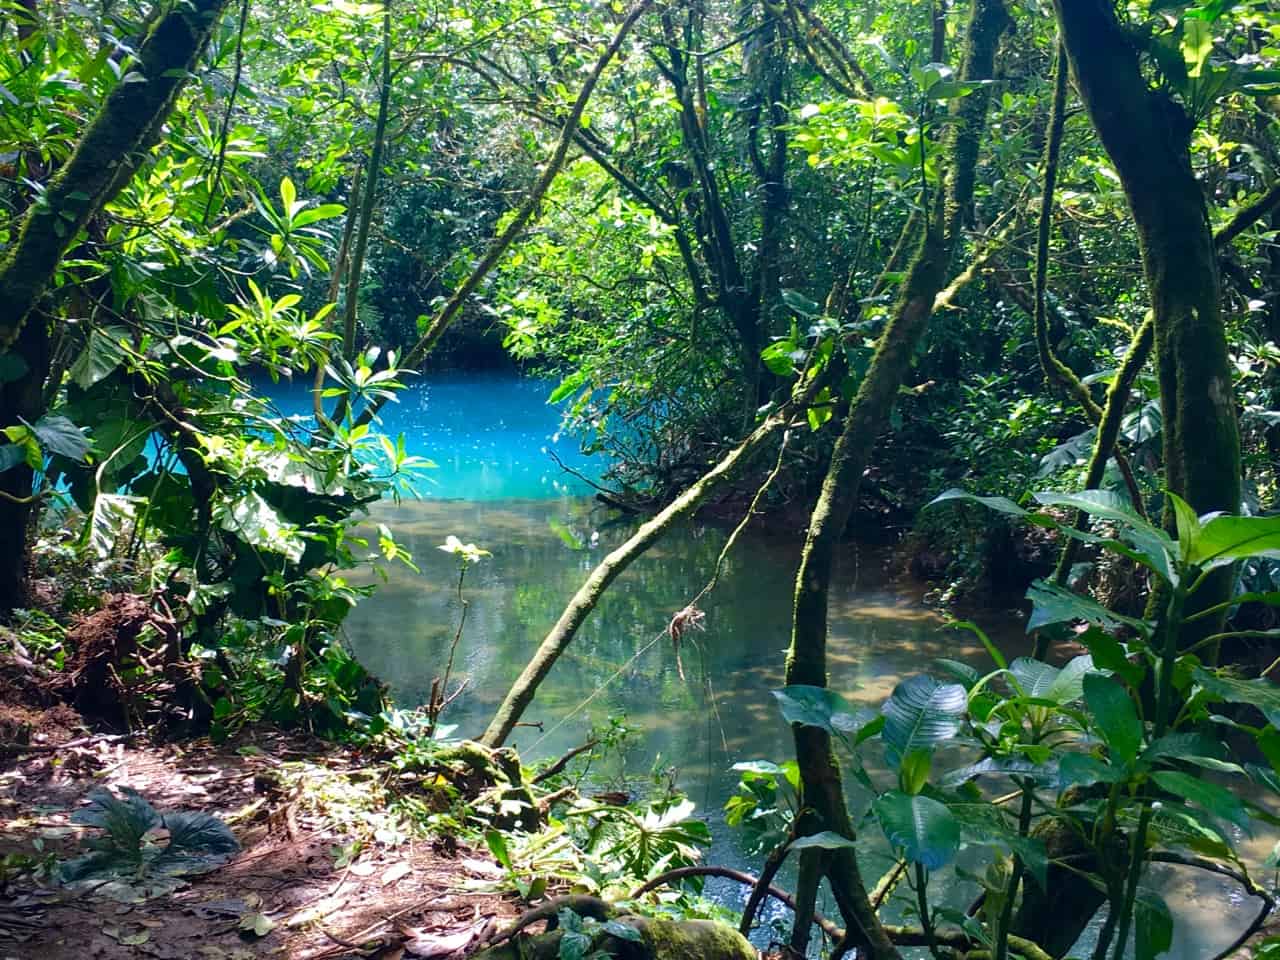 Los Teñidores in Costa Rica, where two clear water rivers meet and one turns blue.